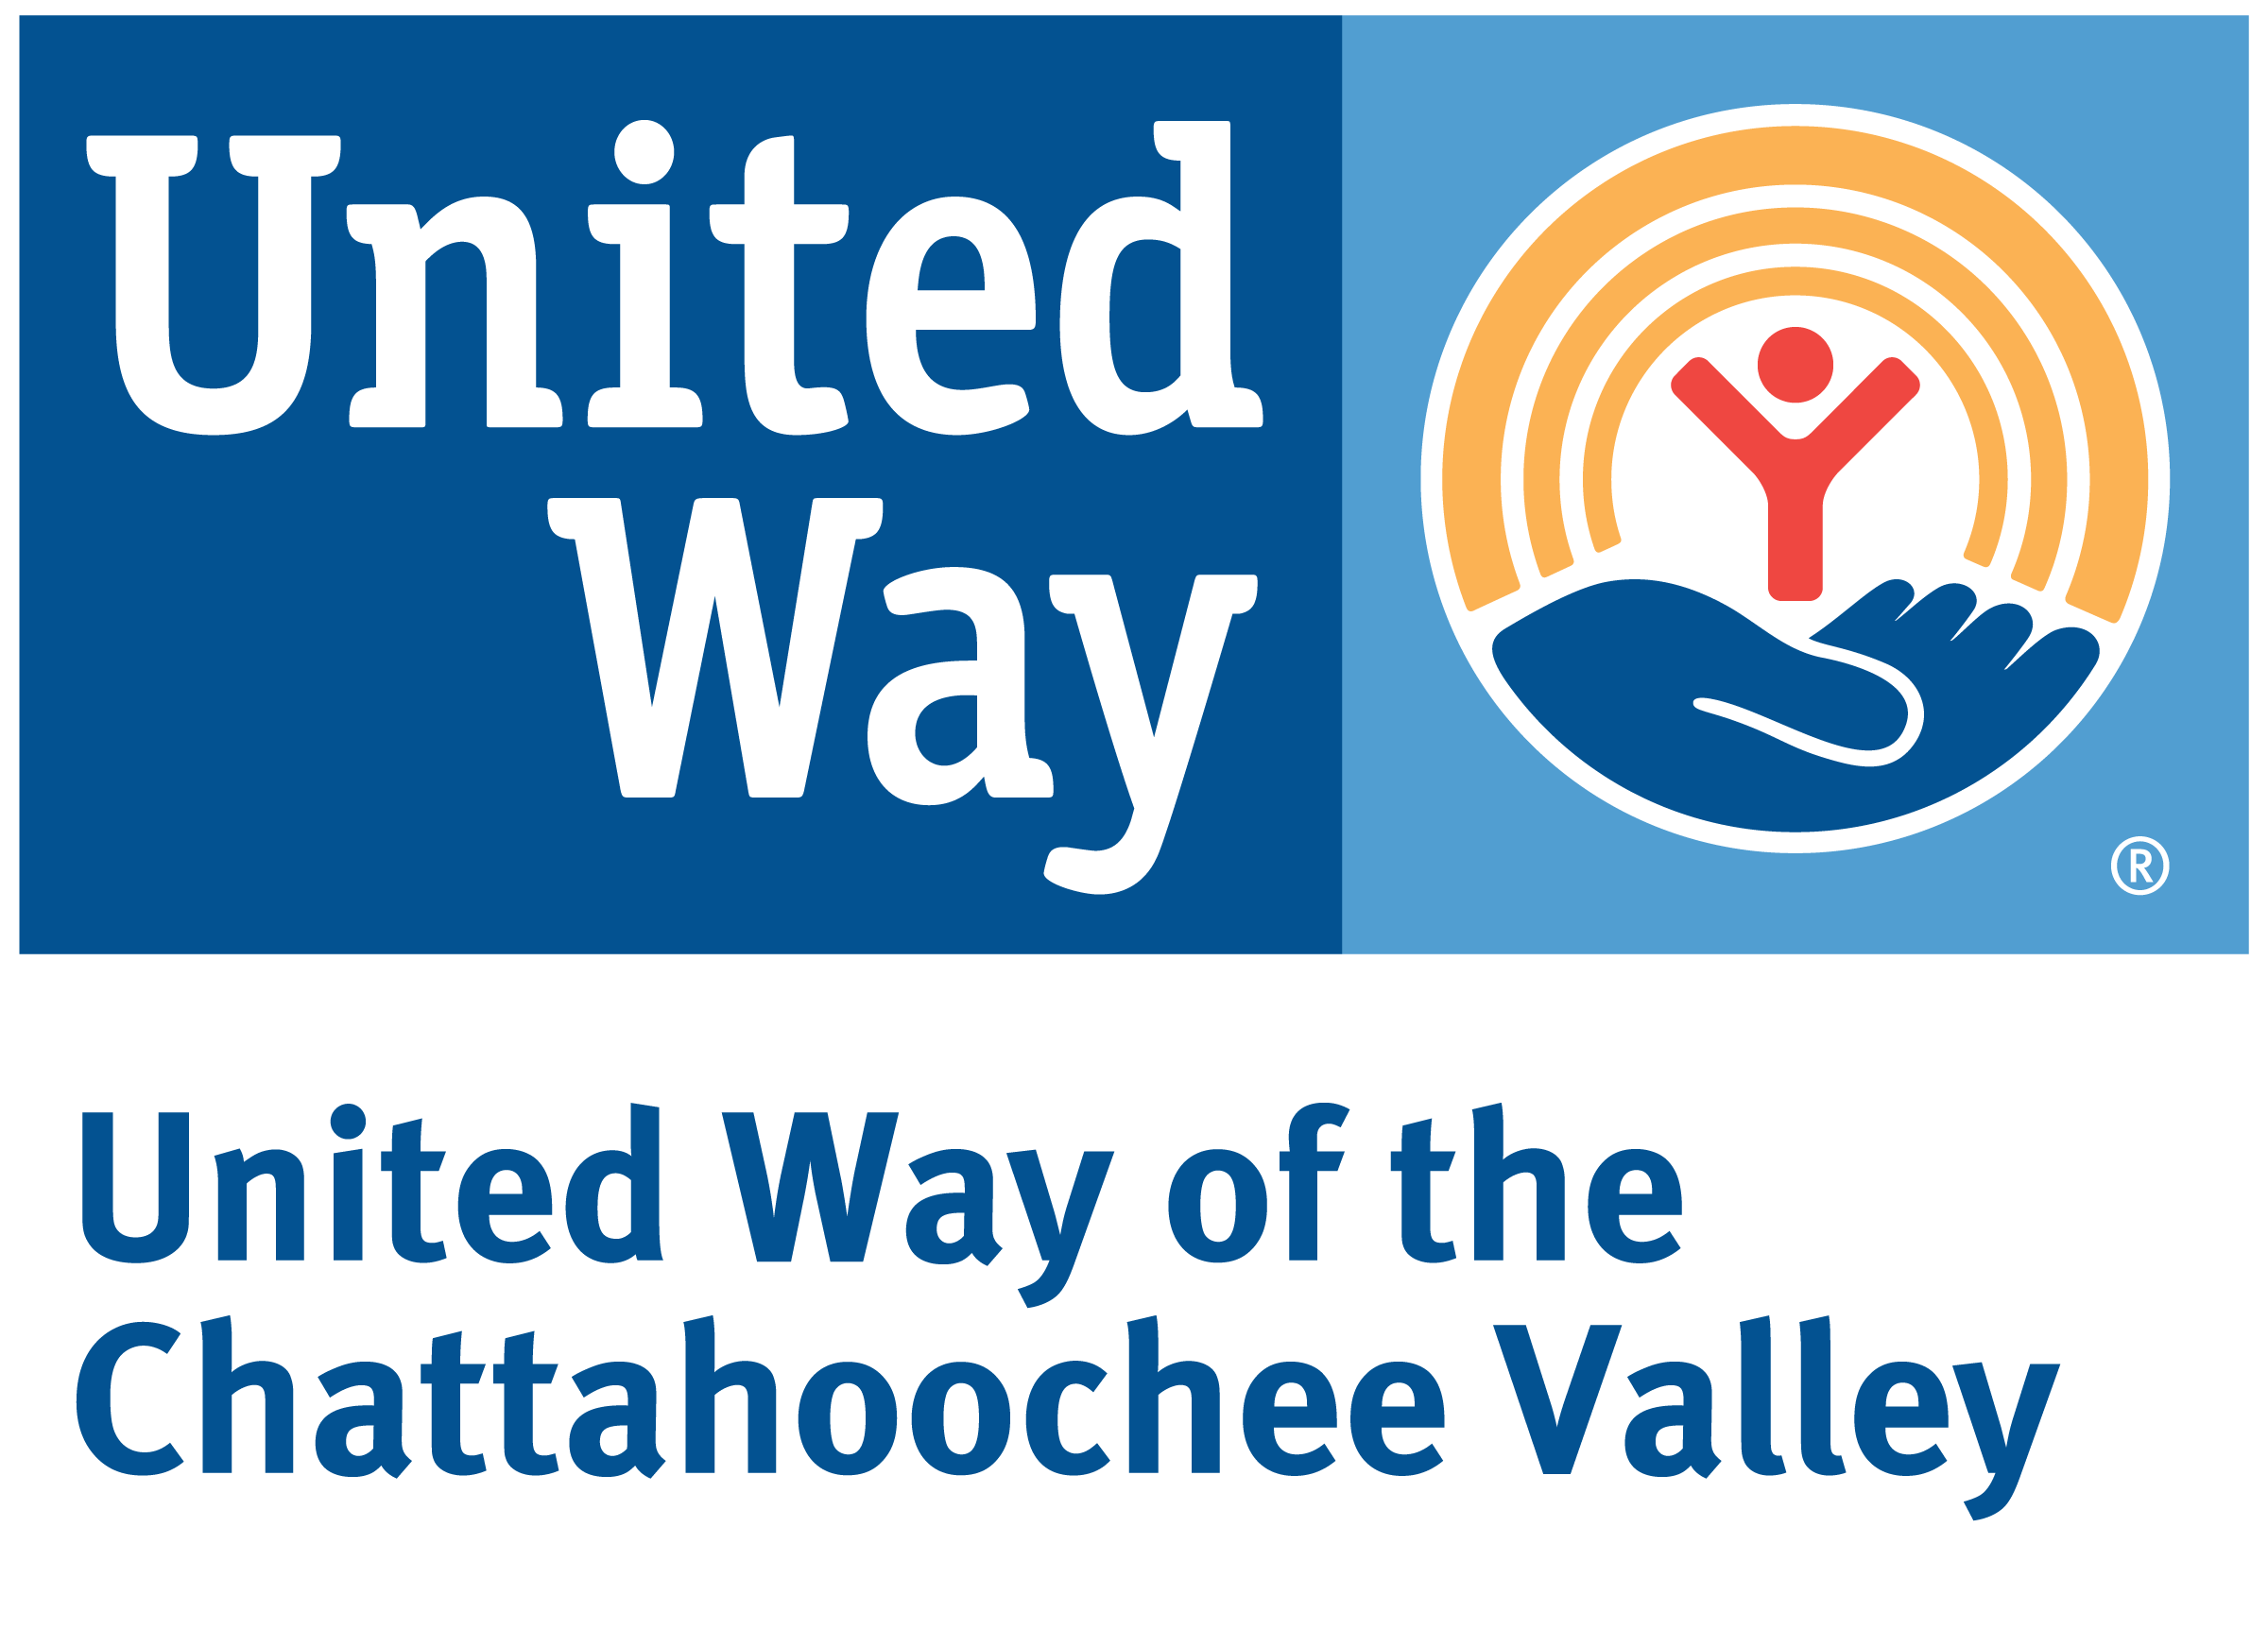 United Way of the Chattahoochee Valley